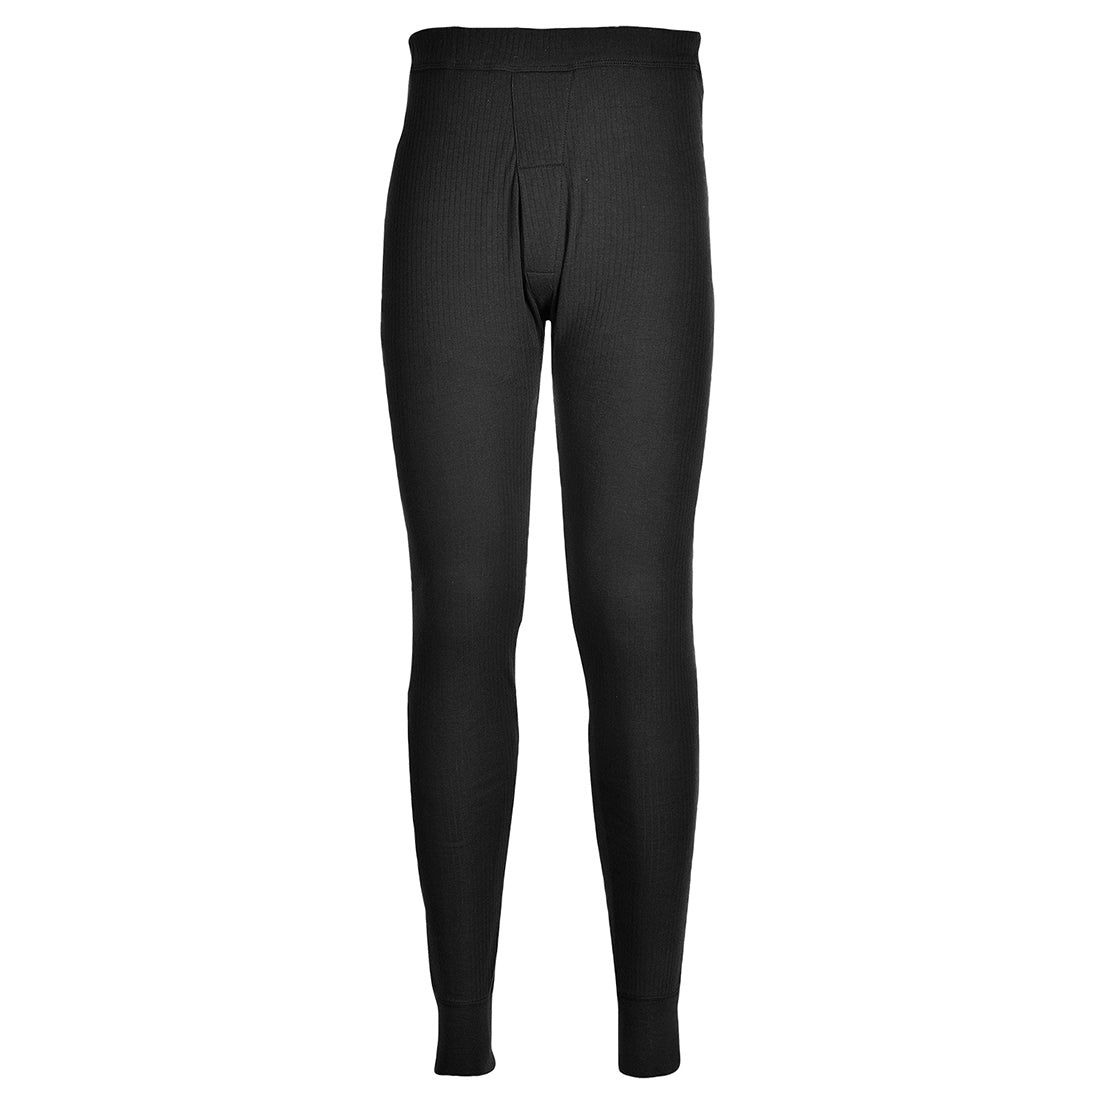 Portwest B121 Thermal Trousers for Baselayer